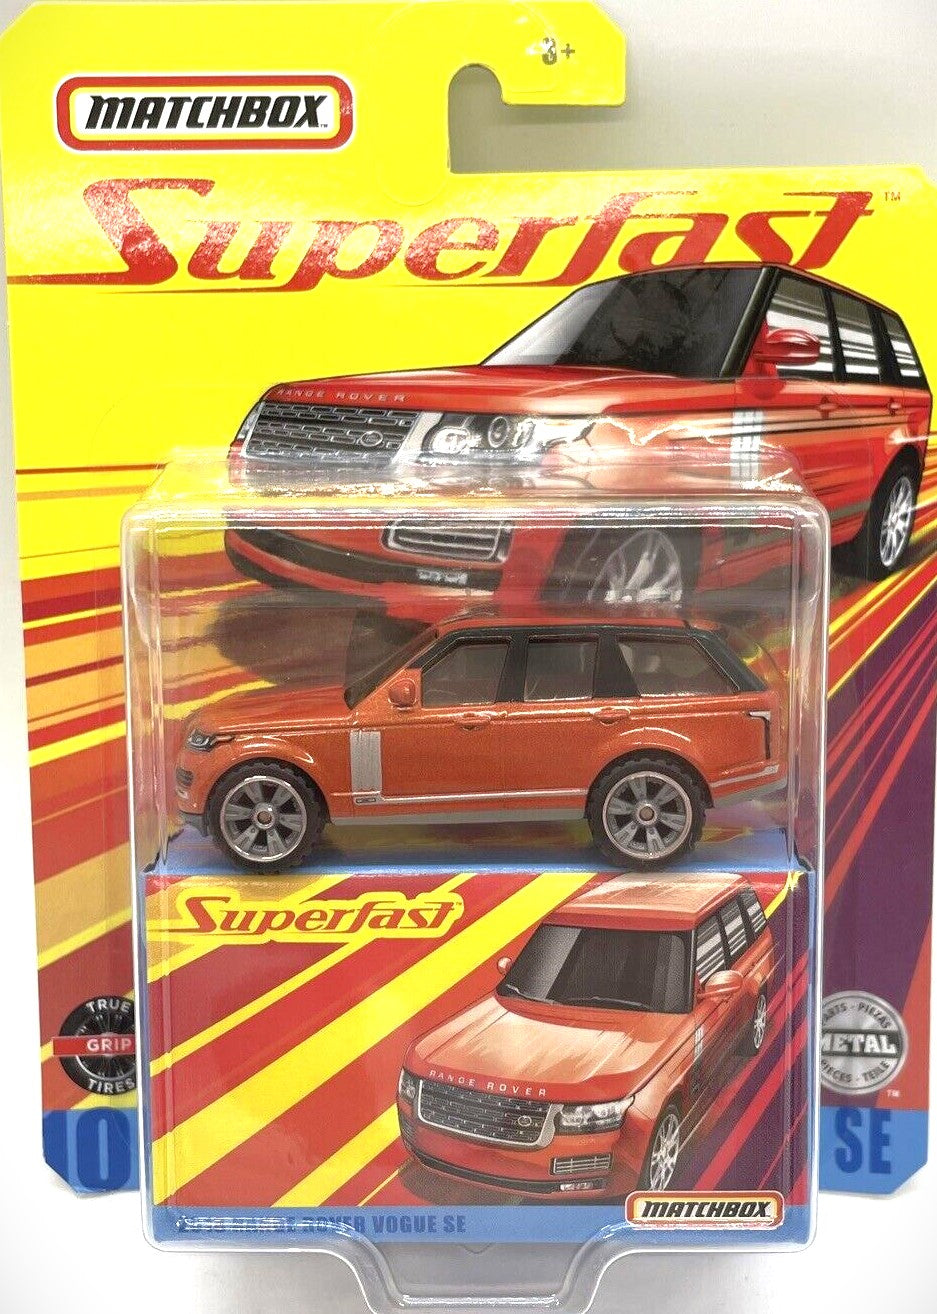 Matchbox Superfast 2018 Range Rover Vogue SE Red 2019 Release #10 Maple and Mangoes